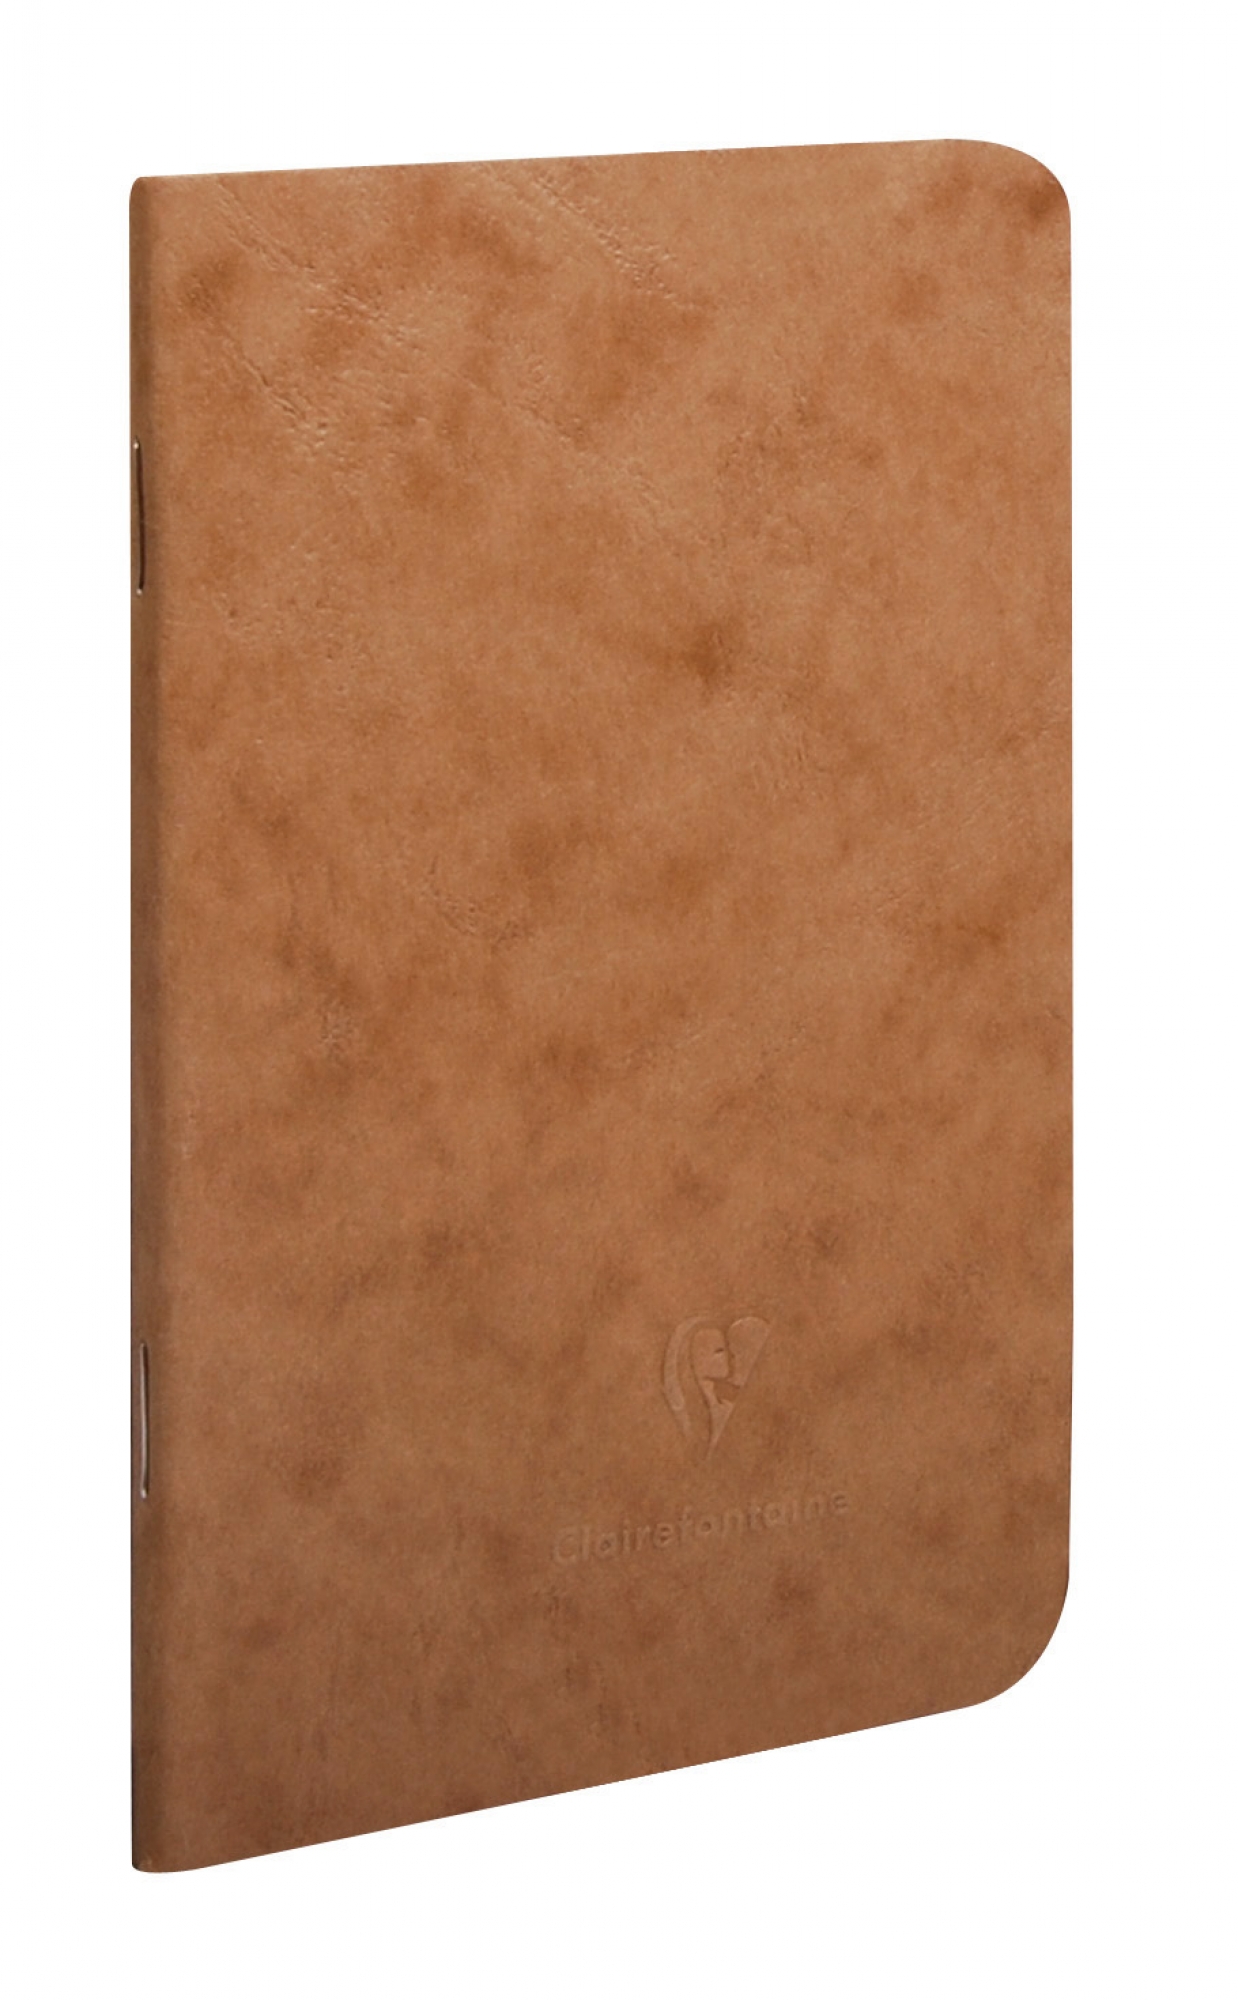 CLAIREFONTAINE LIFE.UNPLUGGED TAN STAPLEBOUND POCKET SIZE NOTEBOOK